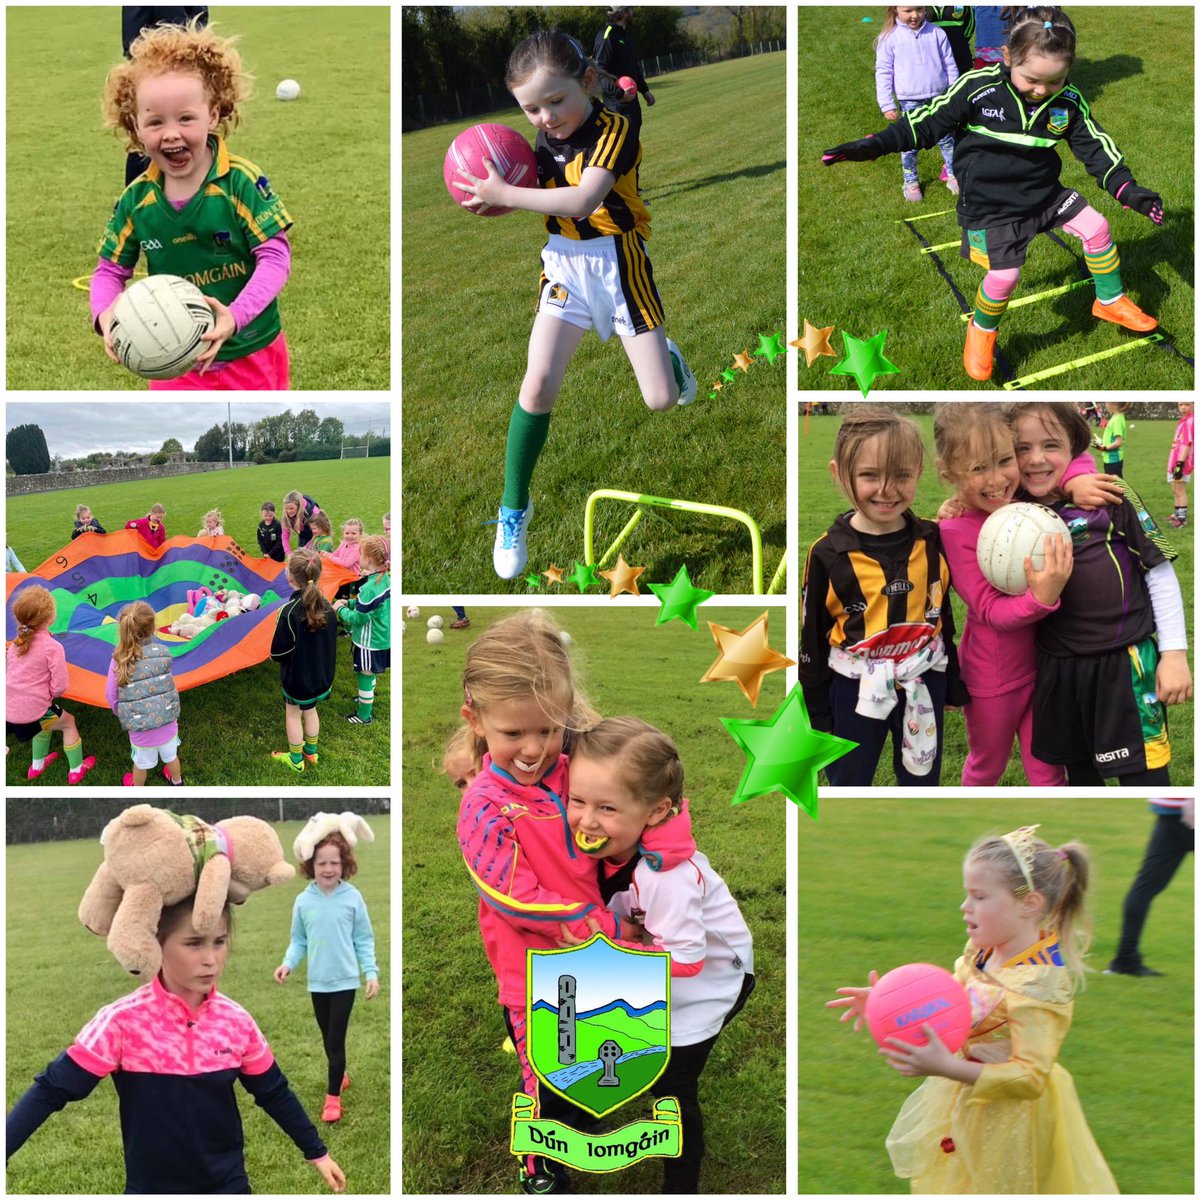 •BACK TOMORROW-SATURDAY• 🏐U6 ✅ 9:20am 🏐U8 ✅ 9:20am 🏐U10. ✅ 9am ( tomorrow then will be 9:20) Teddy to training, fancy dress sessions and parades! Watch video here to see all the fun times ⬇️ youtu.be/6GNnBzgLeXc?fe… Contact us here for more info @kilkennylgfa